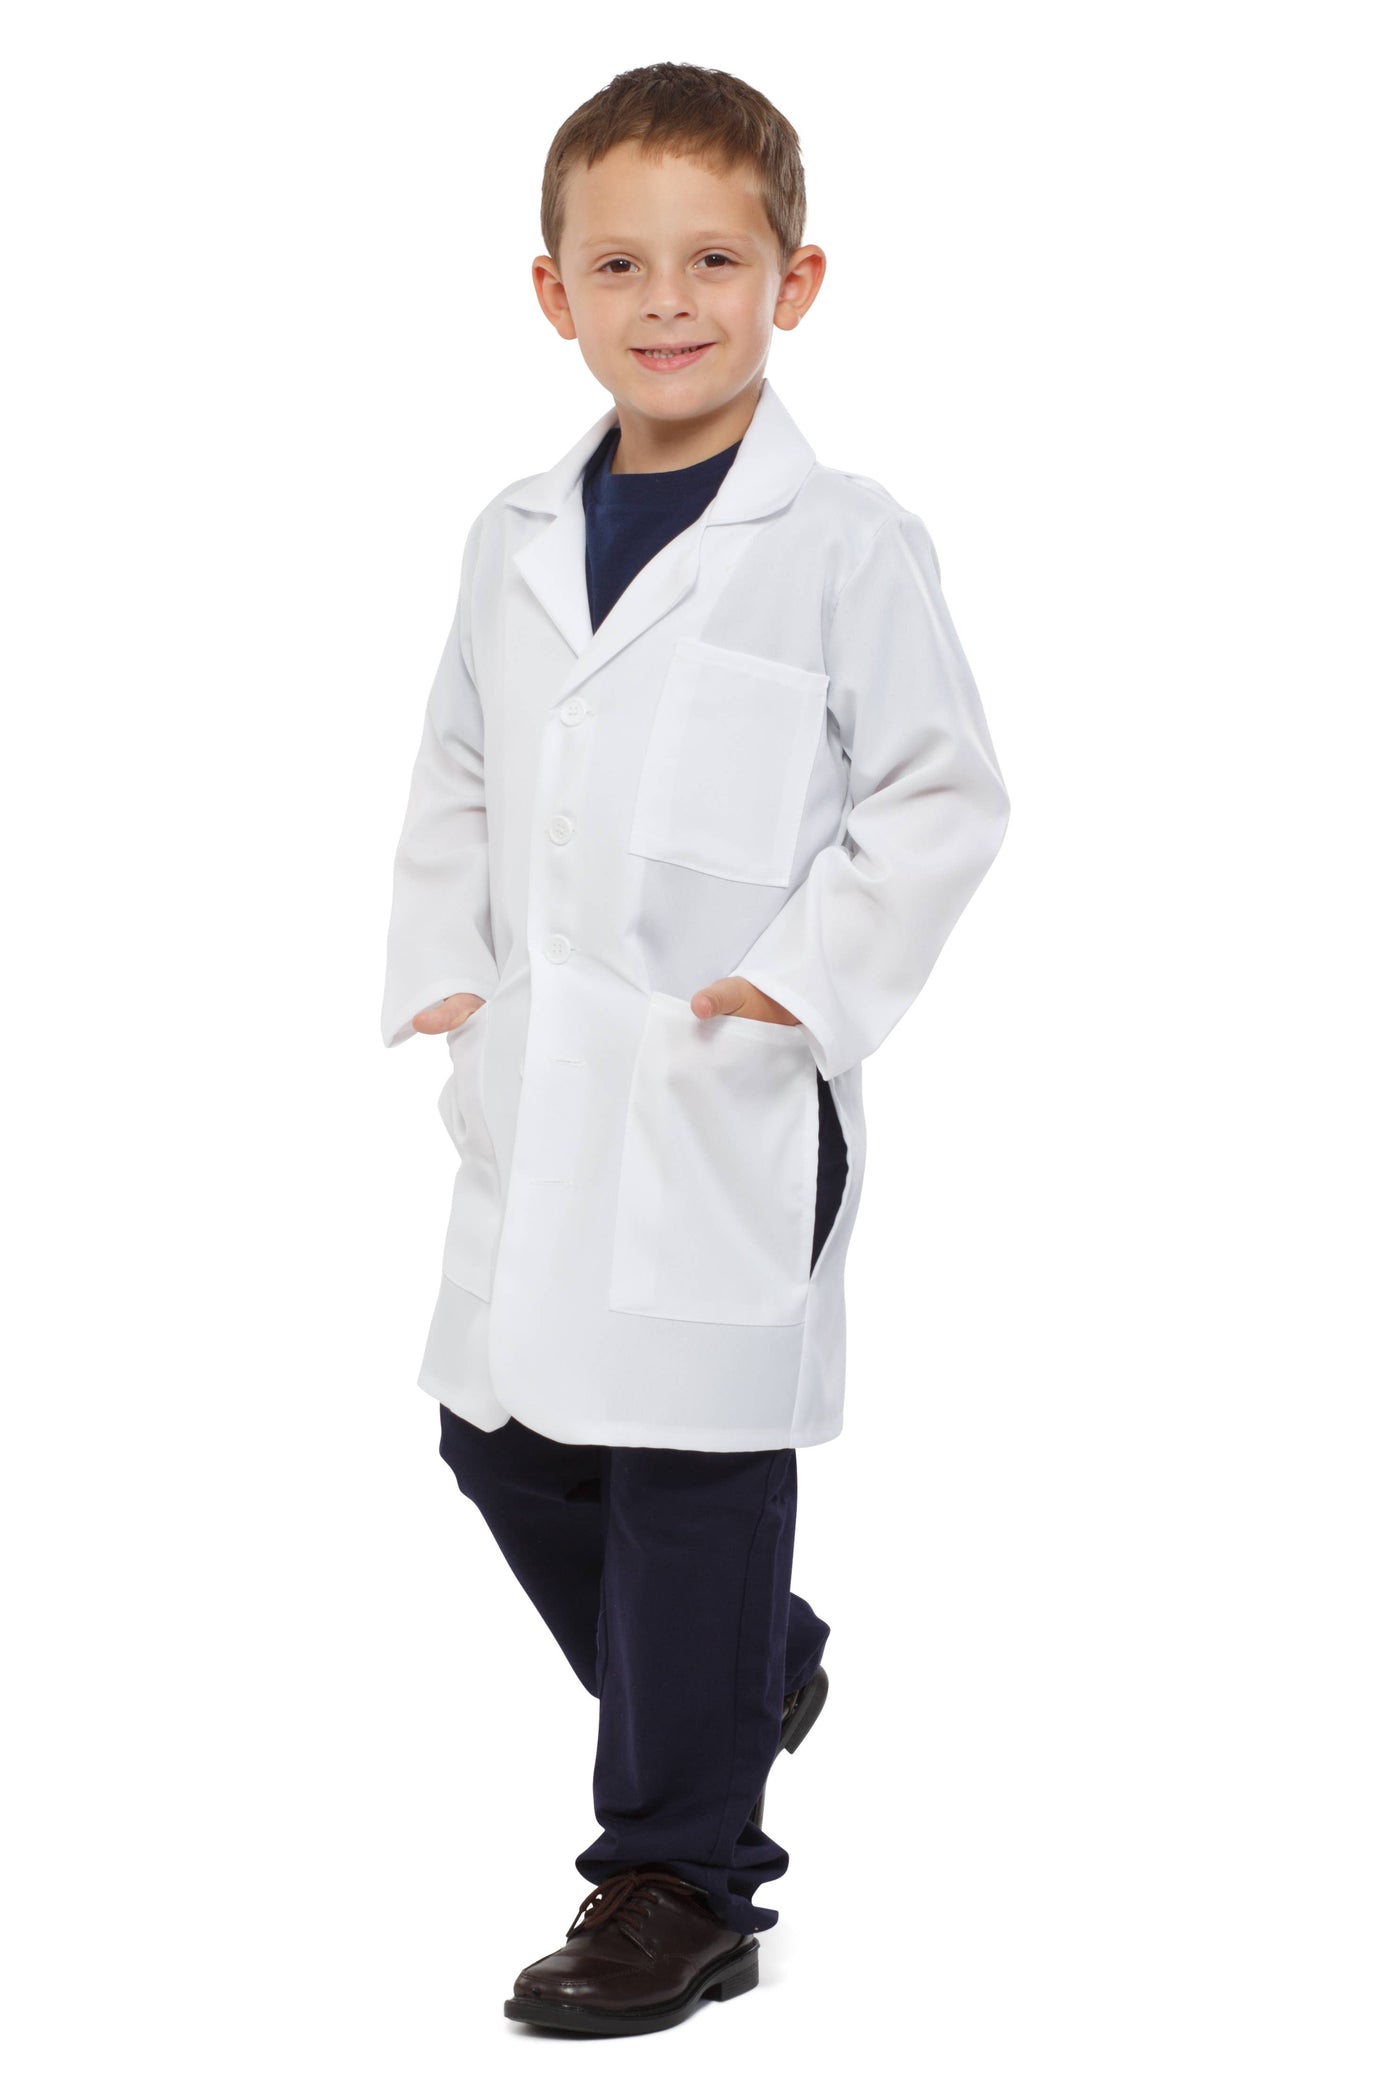 Lab Coat for Kids - Small